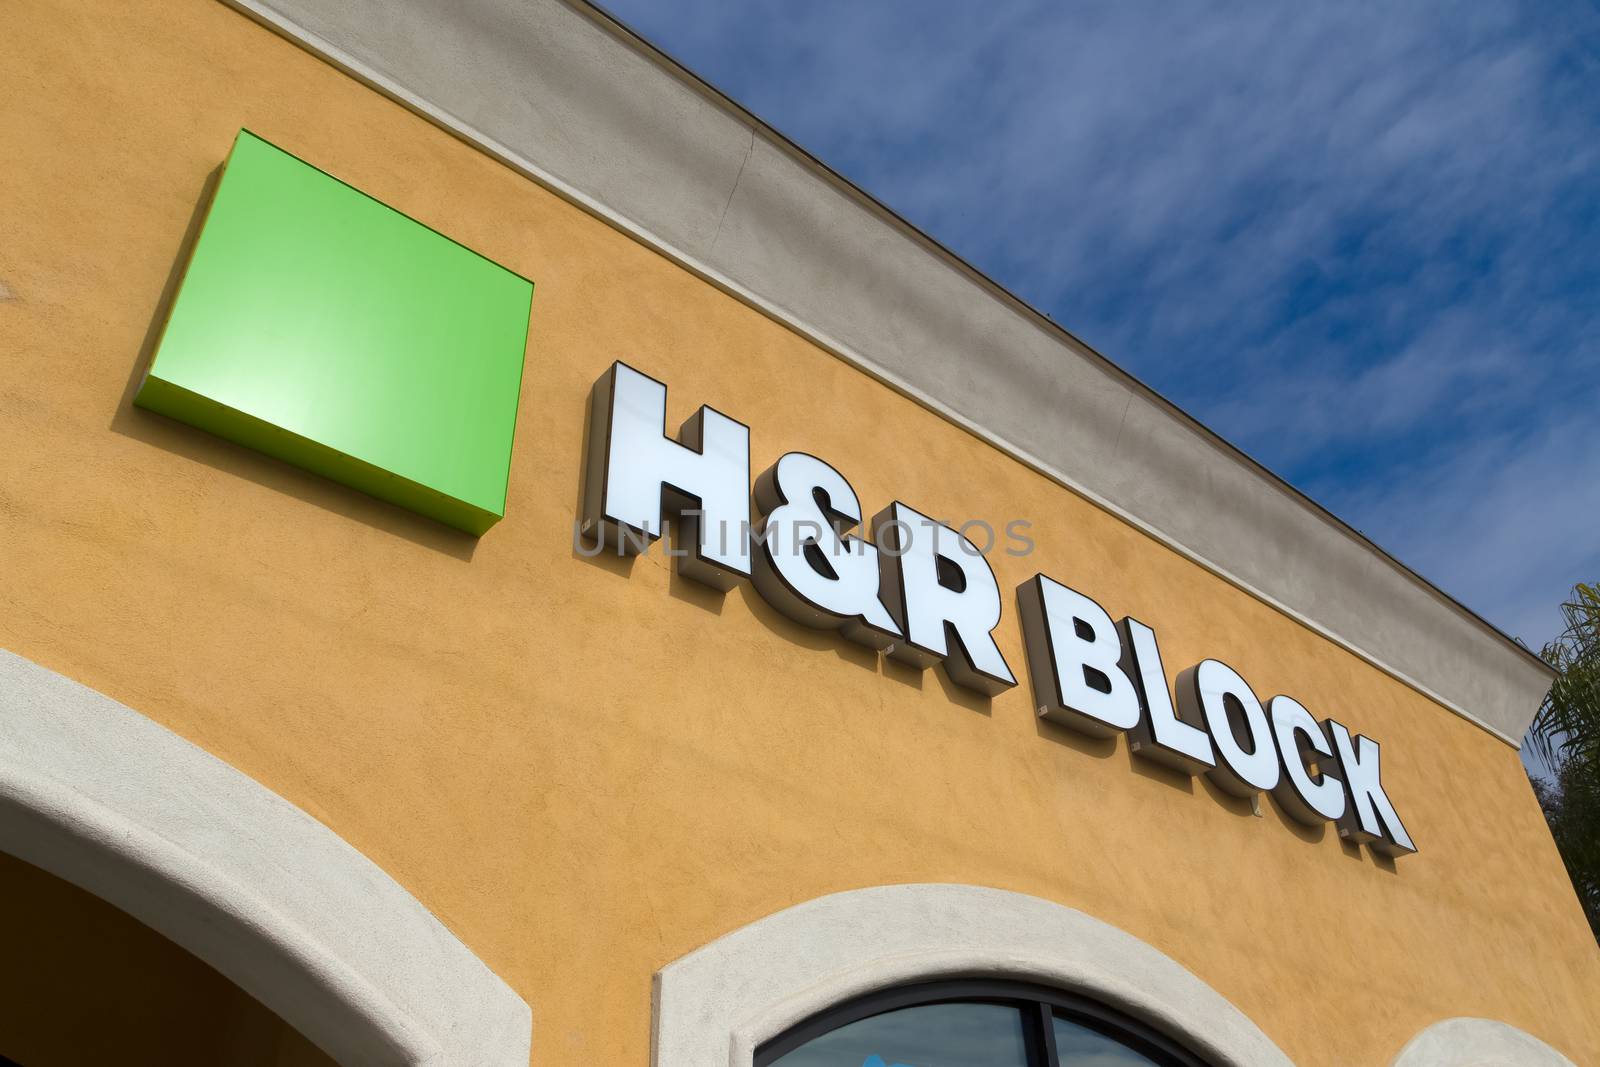 H&R Block Retail Exterior by wolterk